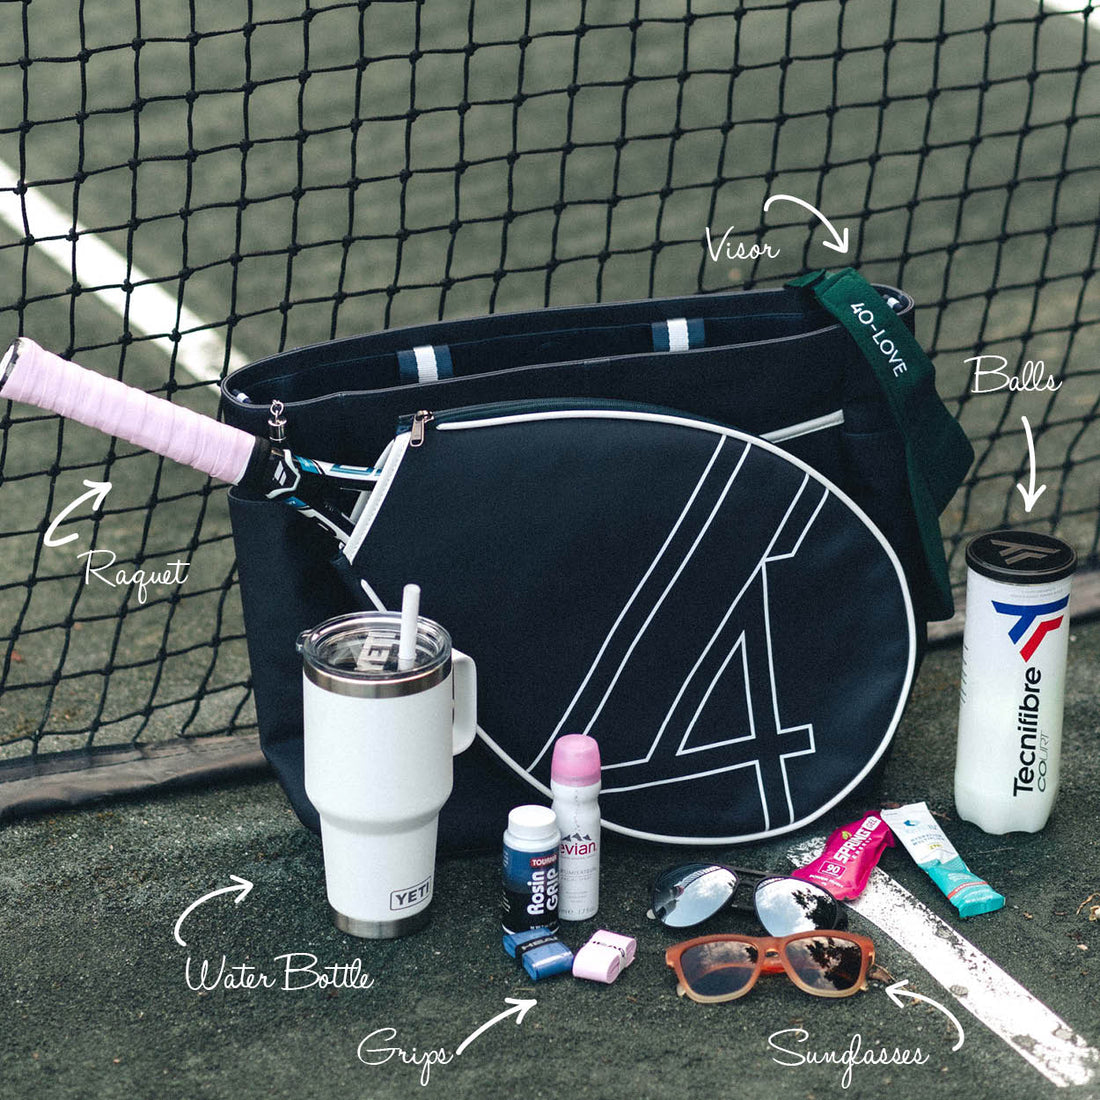 What's in your Tennis Bag?